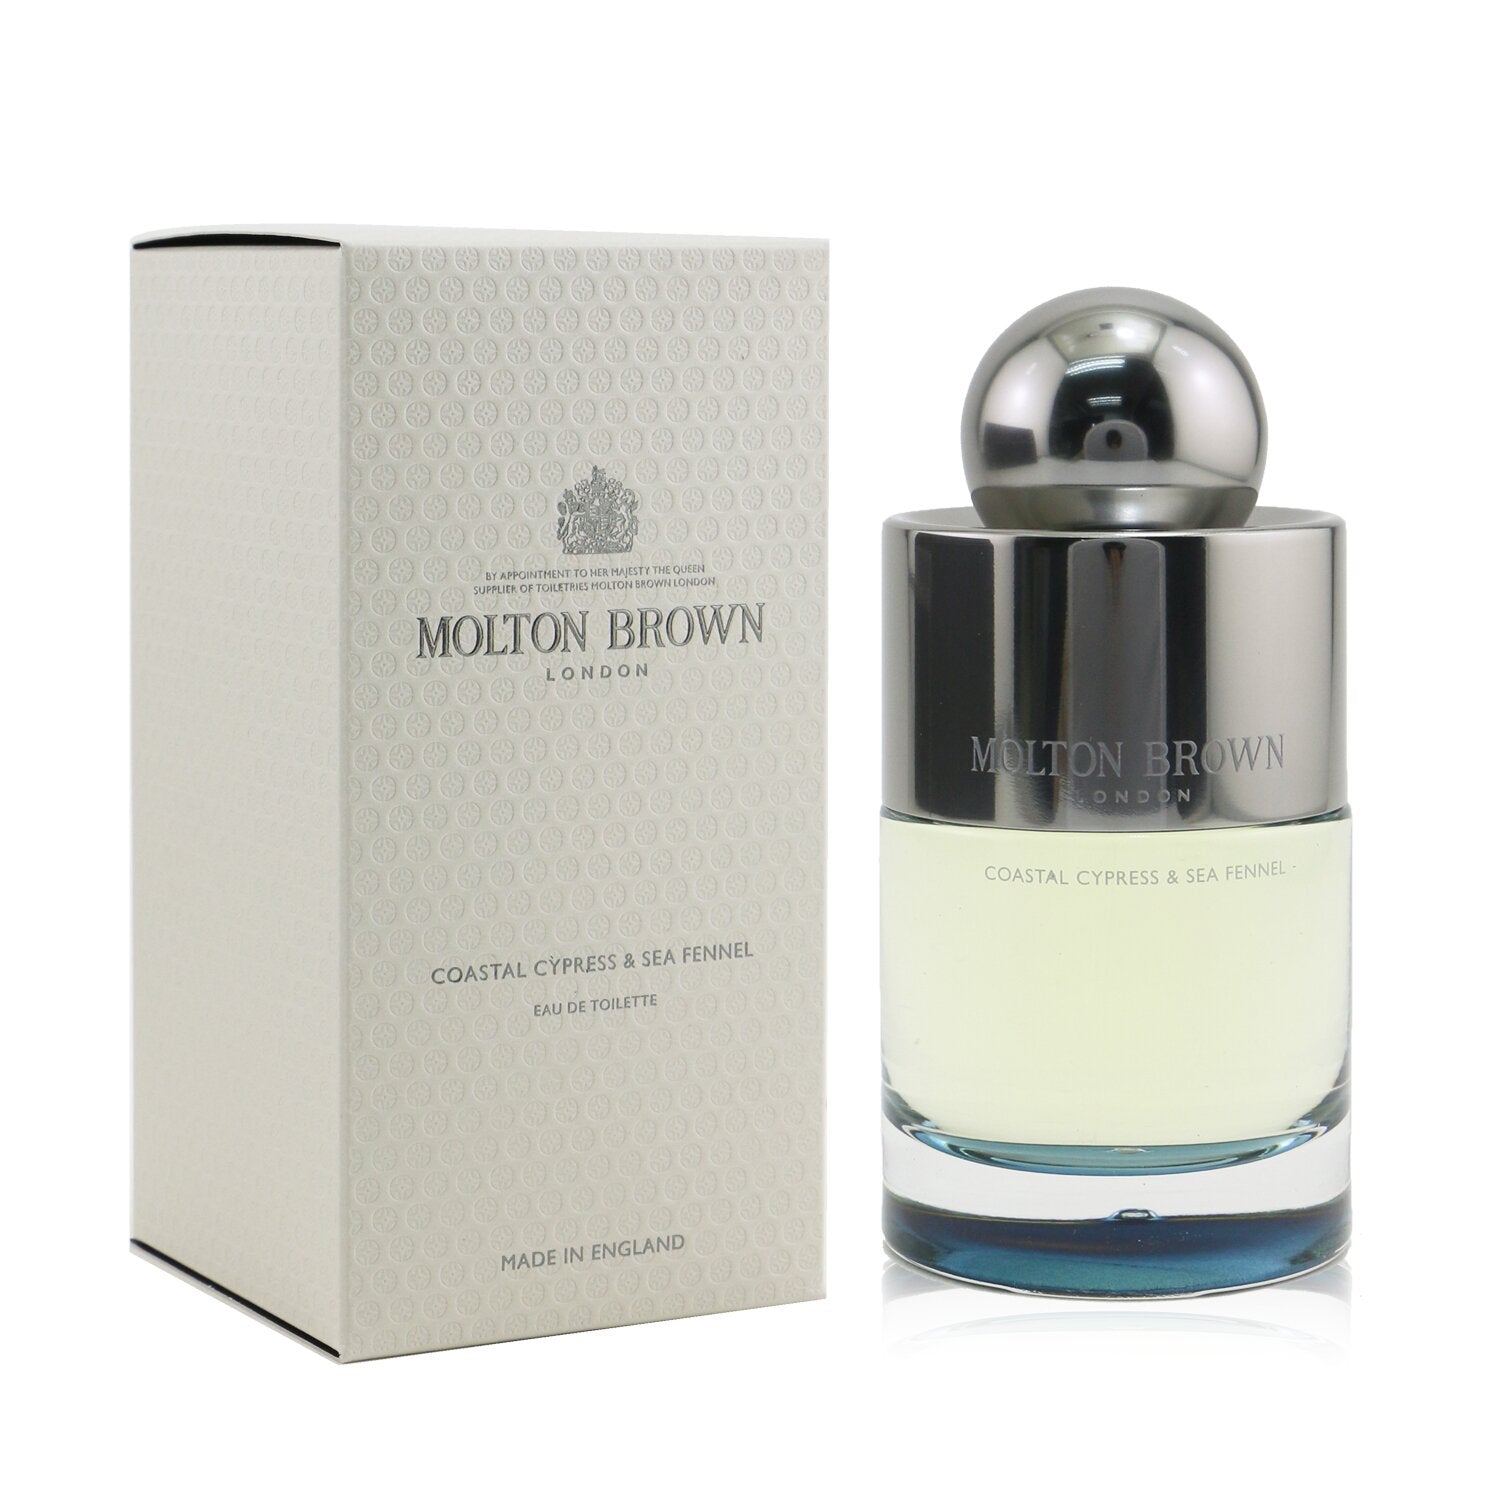 <span>A refreshing and invigorating Eau de Toilette, bursting with notes of fig leaves, marine notes, jasmine, salted cypress and cedarwood. Housed in a collectible and refillable glass flacon.</span>